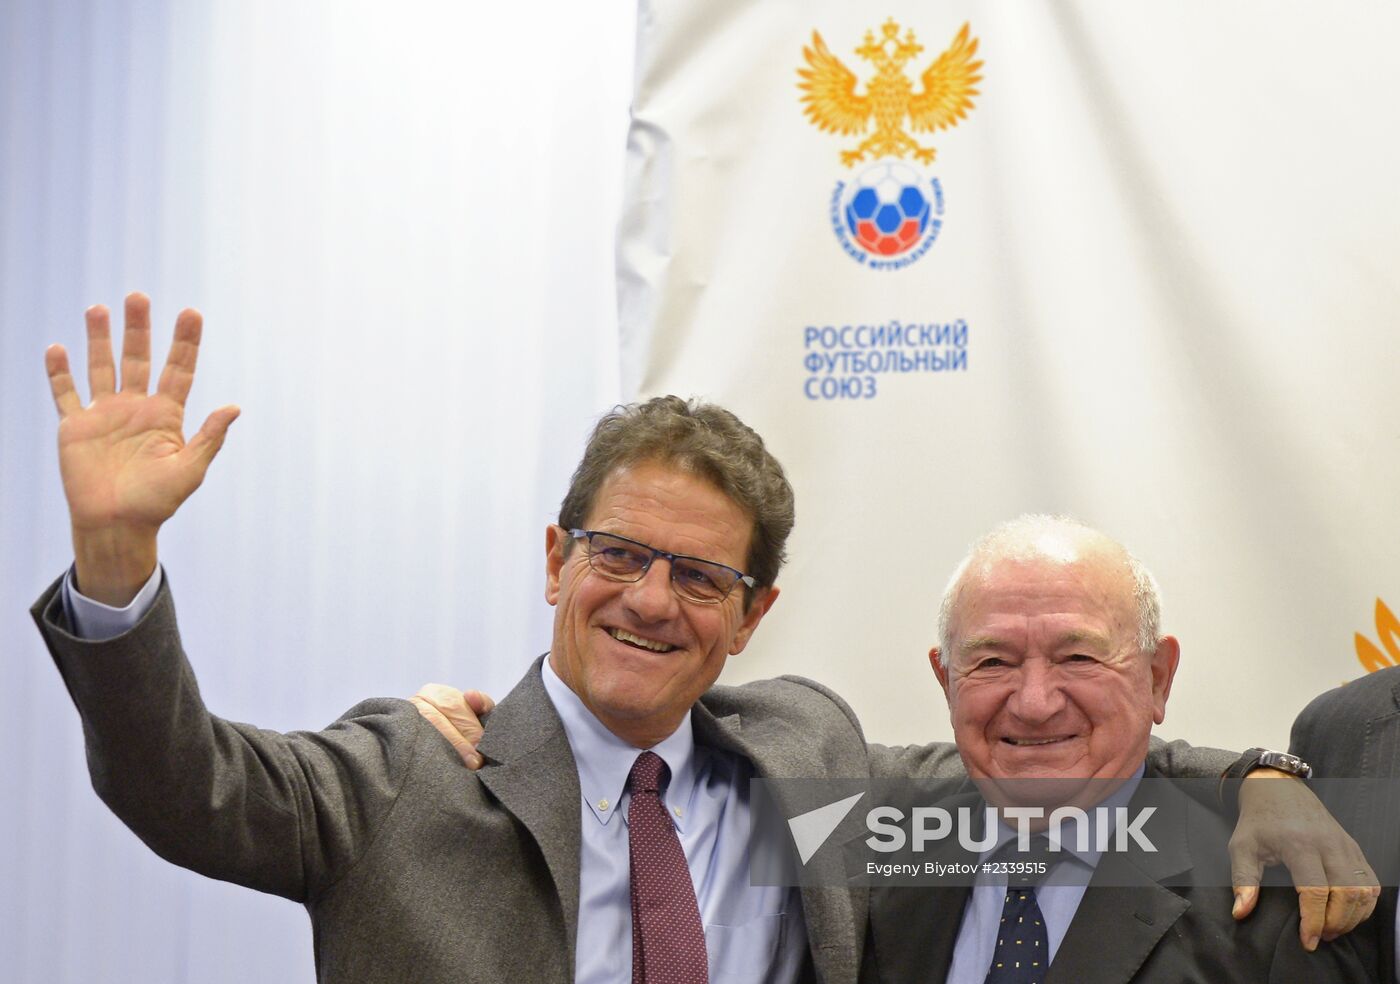 Russian Football Union Executive Committee